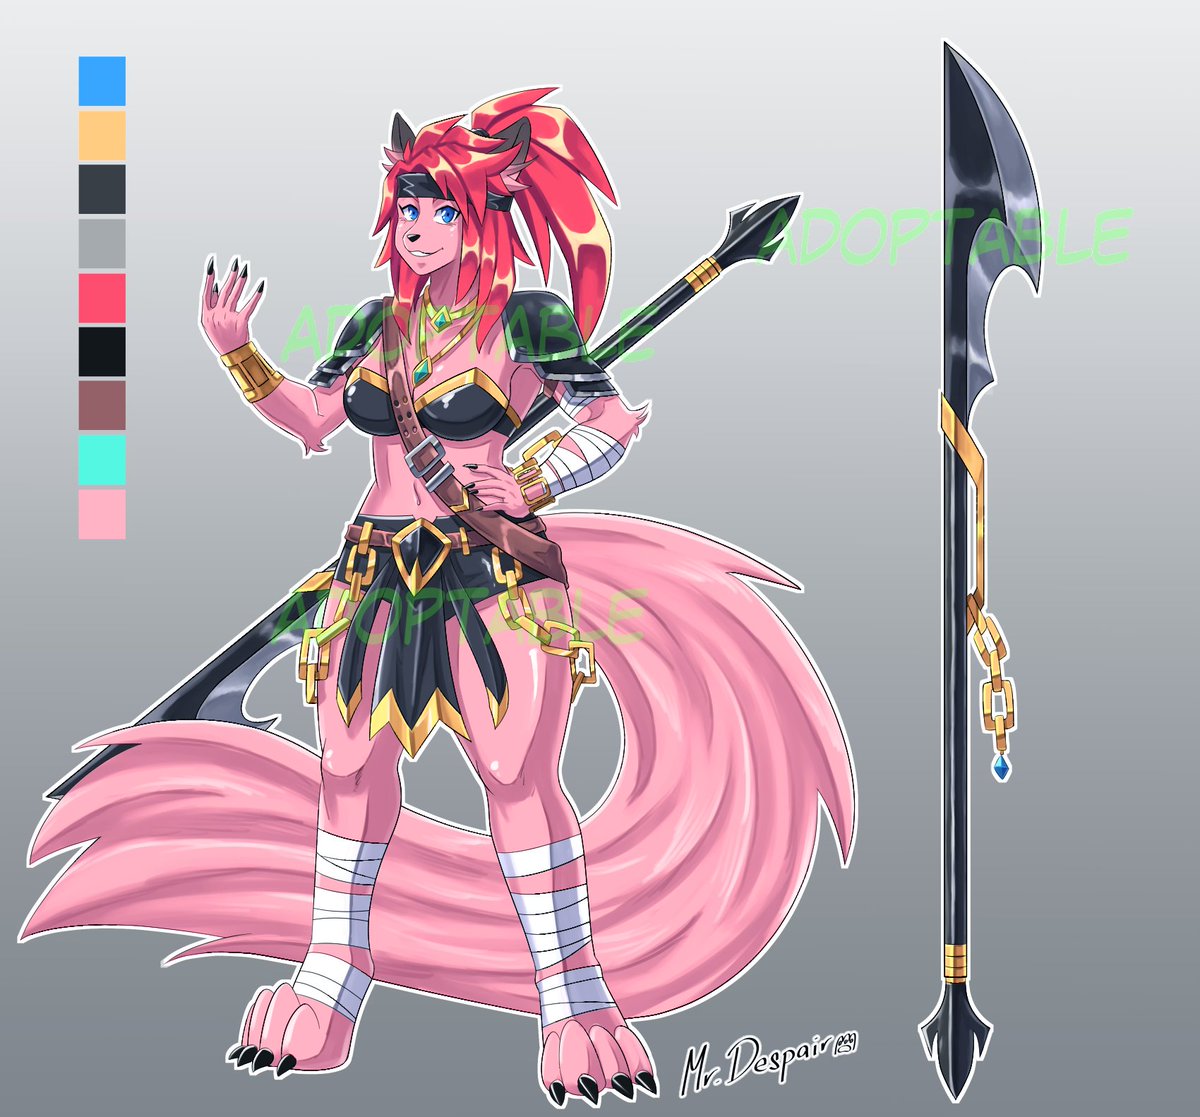 WARRIOR ADOPTABLE
Link in comments

#adopt #adopts #adoptable #auction #openauction #openadoptable #originalcharacter #adoptableauction #ocadoptable #cute #anthro #adoptables #wolf #fox #female #forsale #paypal #oc #wolfadoptable #furry #characterforsale #fantasy #warrior #sword